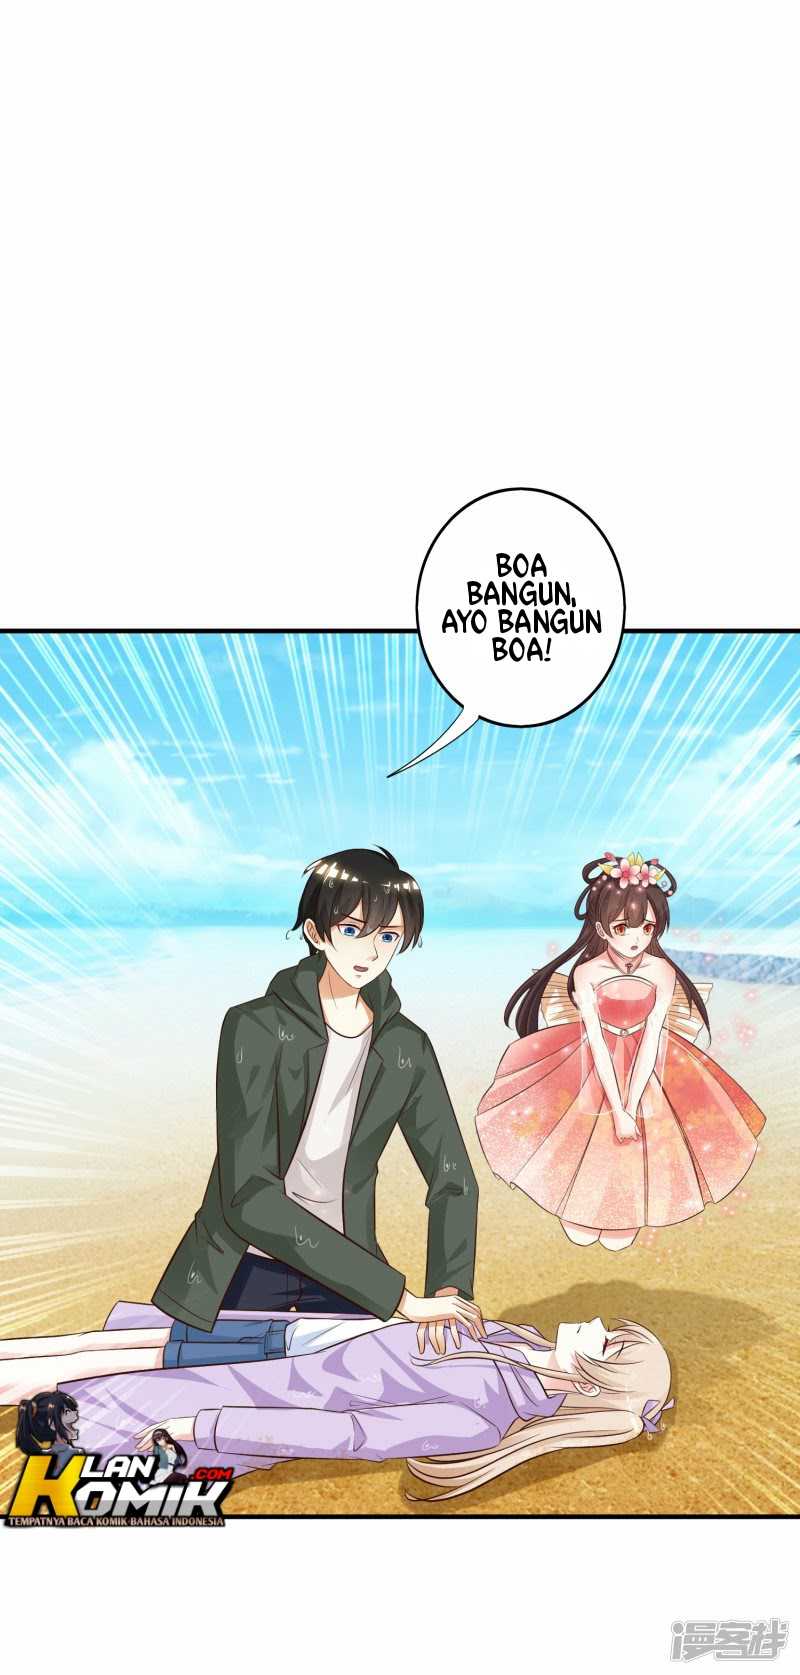 The Strongest Peach Blossom Chapter 47